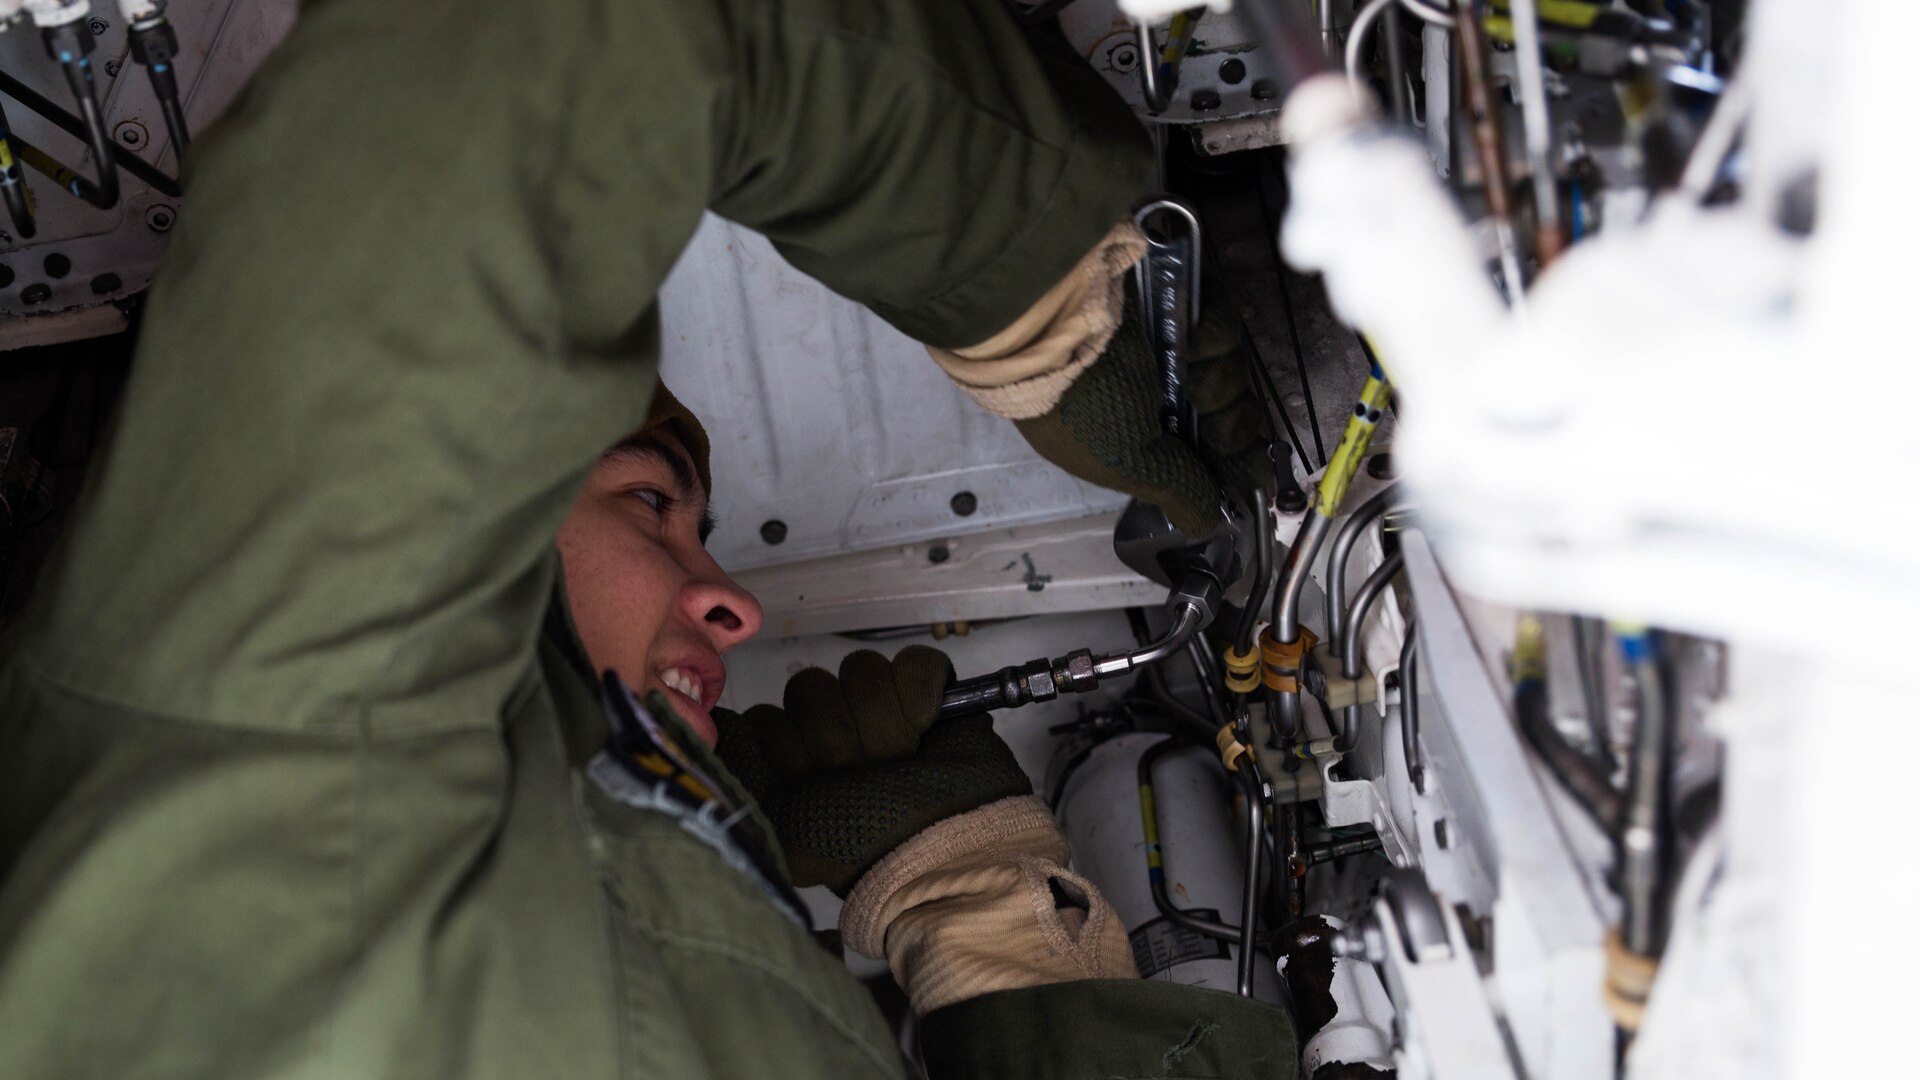 U.S. Marine Corps Lance Cpl. Anthony Dominguez, an air framer with Marine Attack Squadron 542, works on an AV-8B Harrier during the Aviation Training Relocation Program at Chitose Air Base, Japan, Dec. 7, 2016. Keeping the Harriers well maintained and ensuring the proper function of all systems is essential to supporting the ATR. 